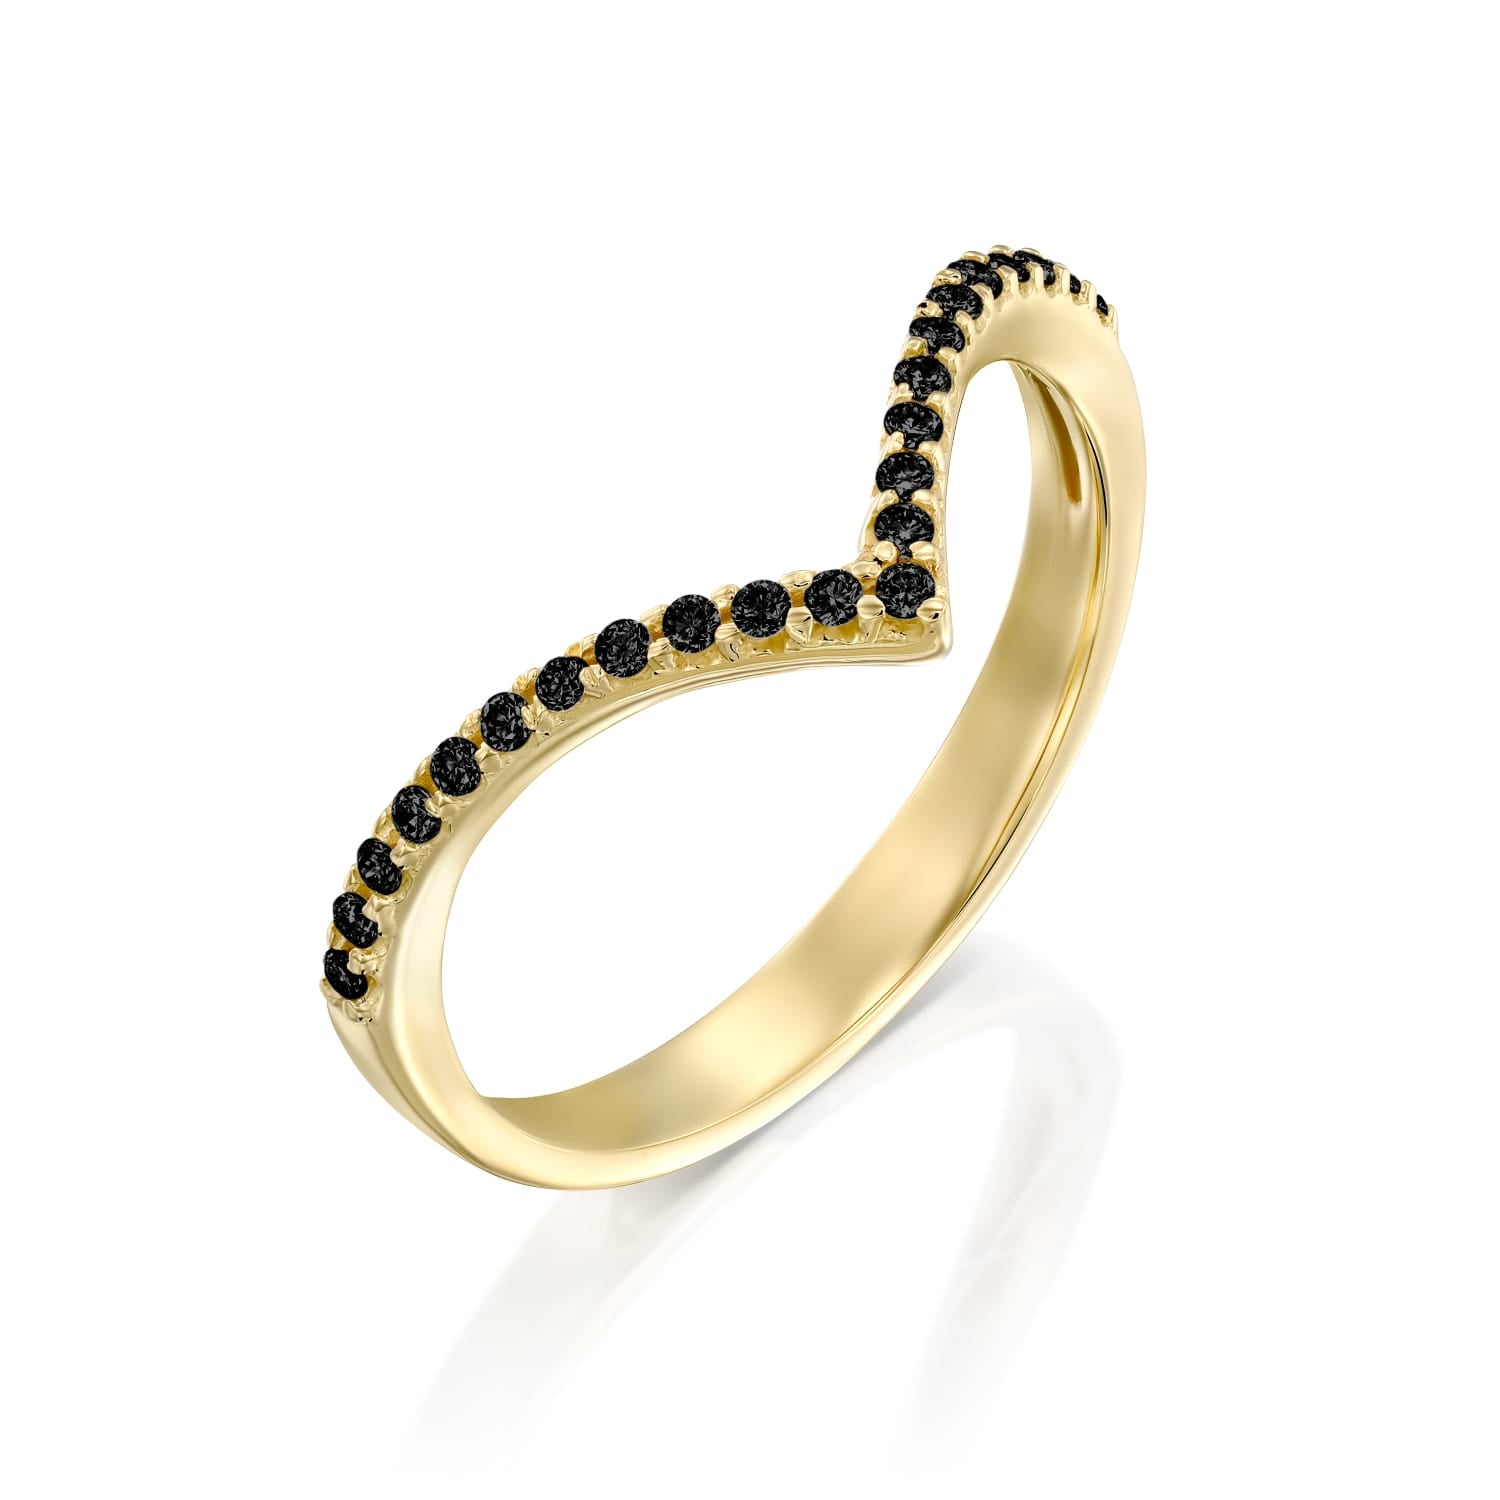 V ring inlaid with black stones